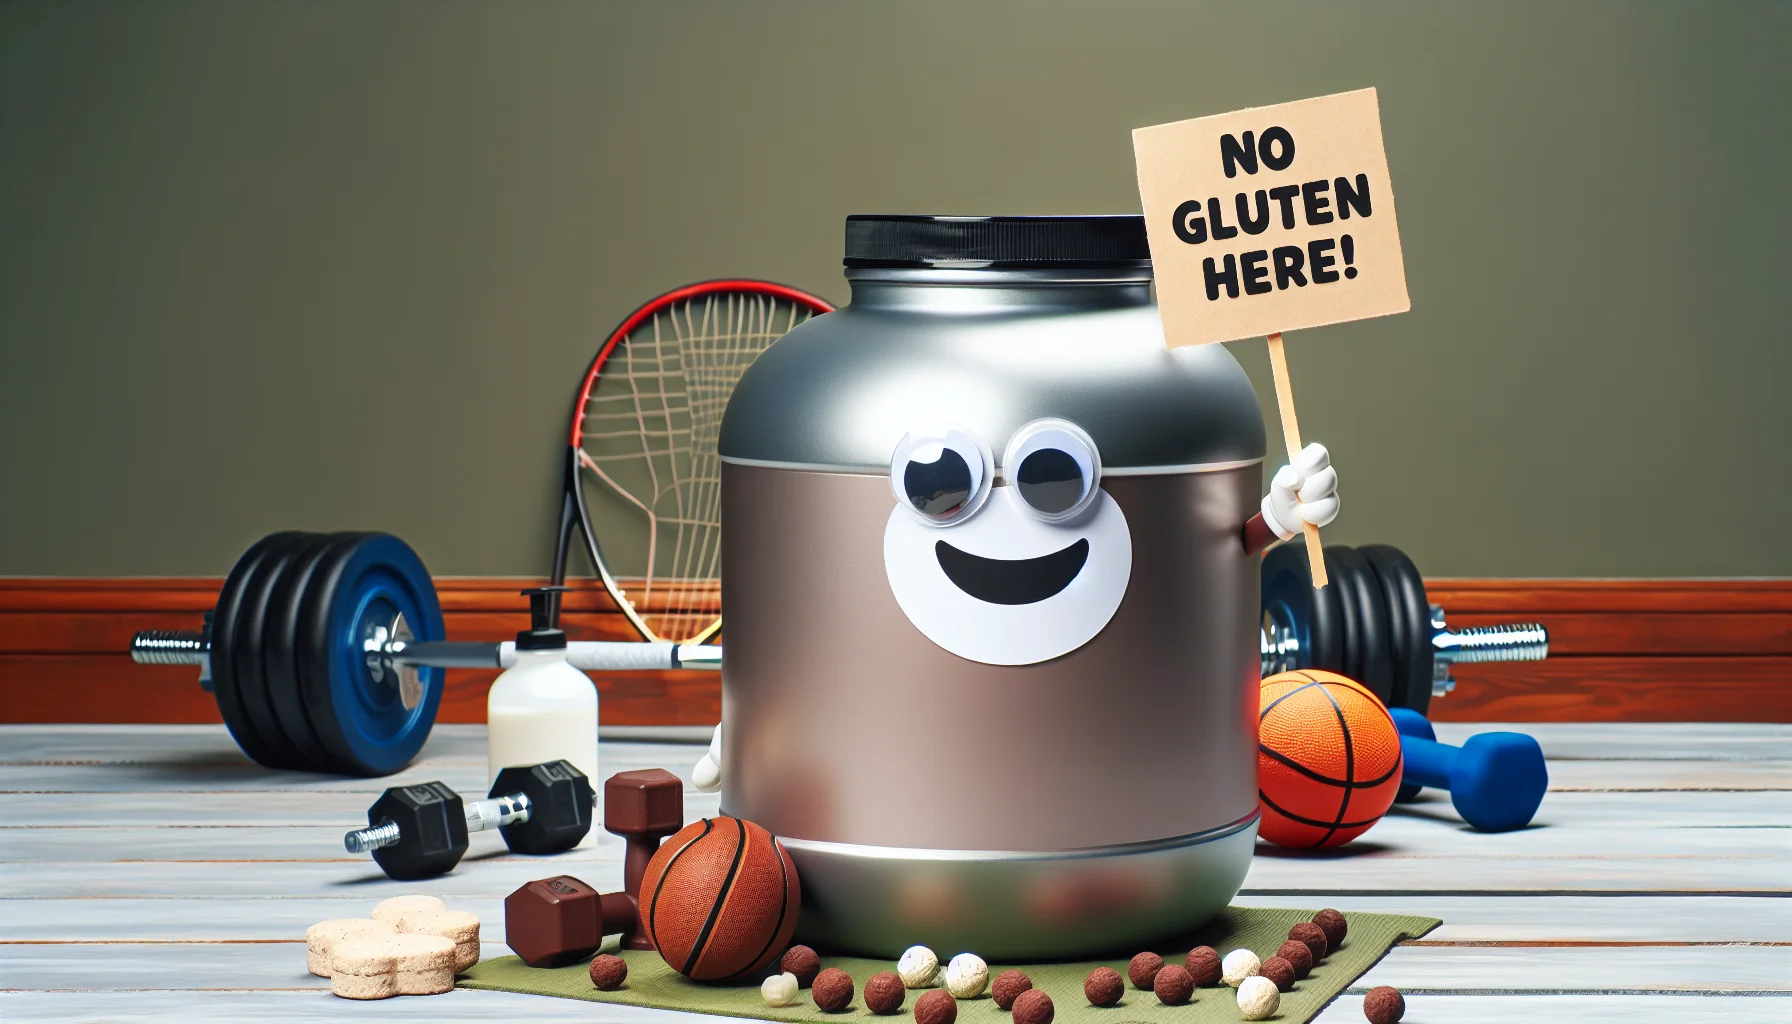 Create a humorous scene where a large tub of whey protein, personified with googly eyes and a wide smile, is in the center of the picture. Its container is shaking its head with a sign in one hand alongside which reads 'No Gluten Here!'. It is surrounded by a range of sports equipment such as a basketball, tennis racket, dumbbells scattered about to insinuate it's commonly used in a fitness context. Evoke a vibe of welcoming and enthusiasm to make the scene enticing for viewers considering sports supplements.